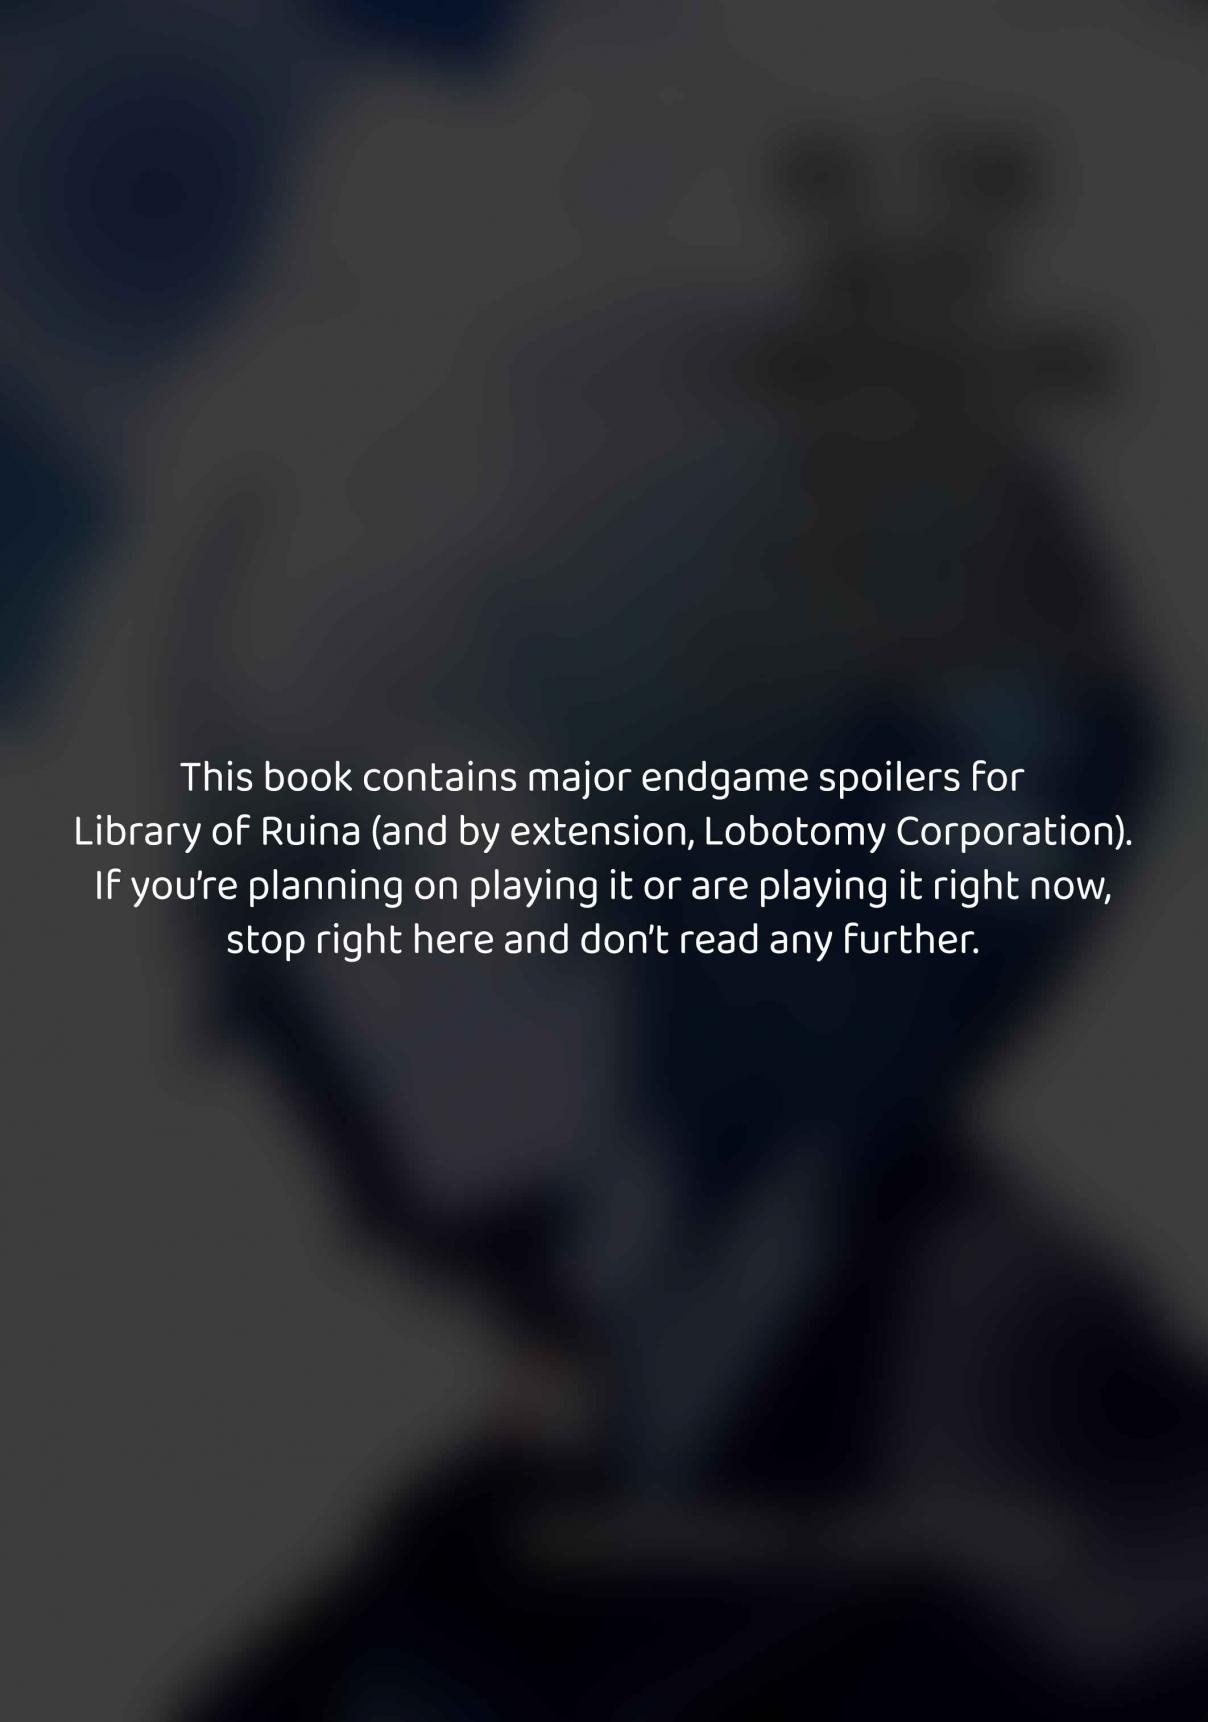 Library of Ruina - As The Head Librarian Heads For The Outskirts Plus (Doujinshi)